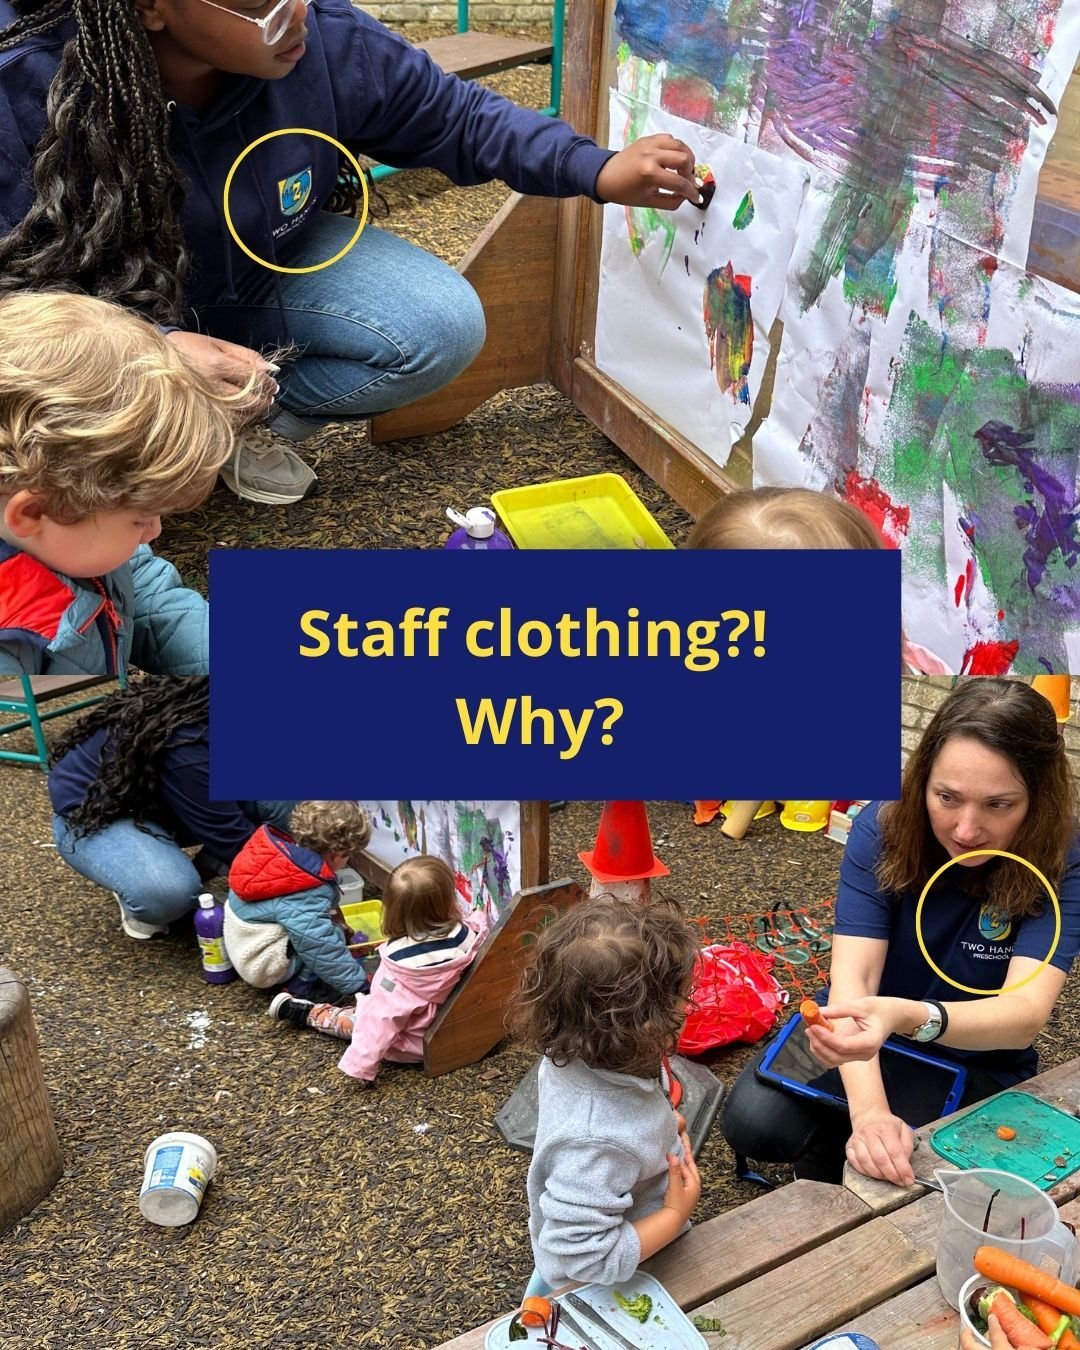 Because they asked for it!

We have Two Hands hoodies and t-shirts for staff - but it's not a uniform and it's certainly not compulsory. 

So why do they want it? 

Here's are some clues:
🎨 🤧 🦠 🧻 🧑&zwj;🎨 

Getting messy comes with the job descr